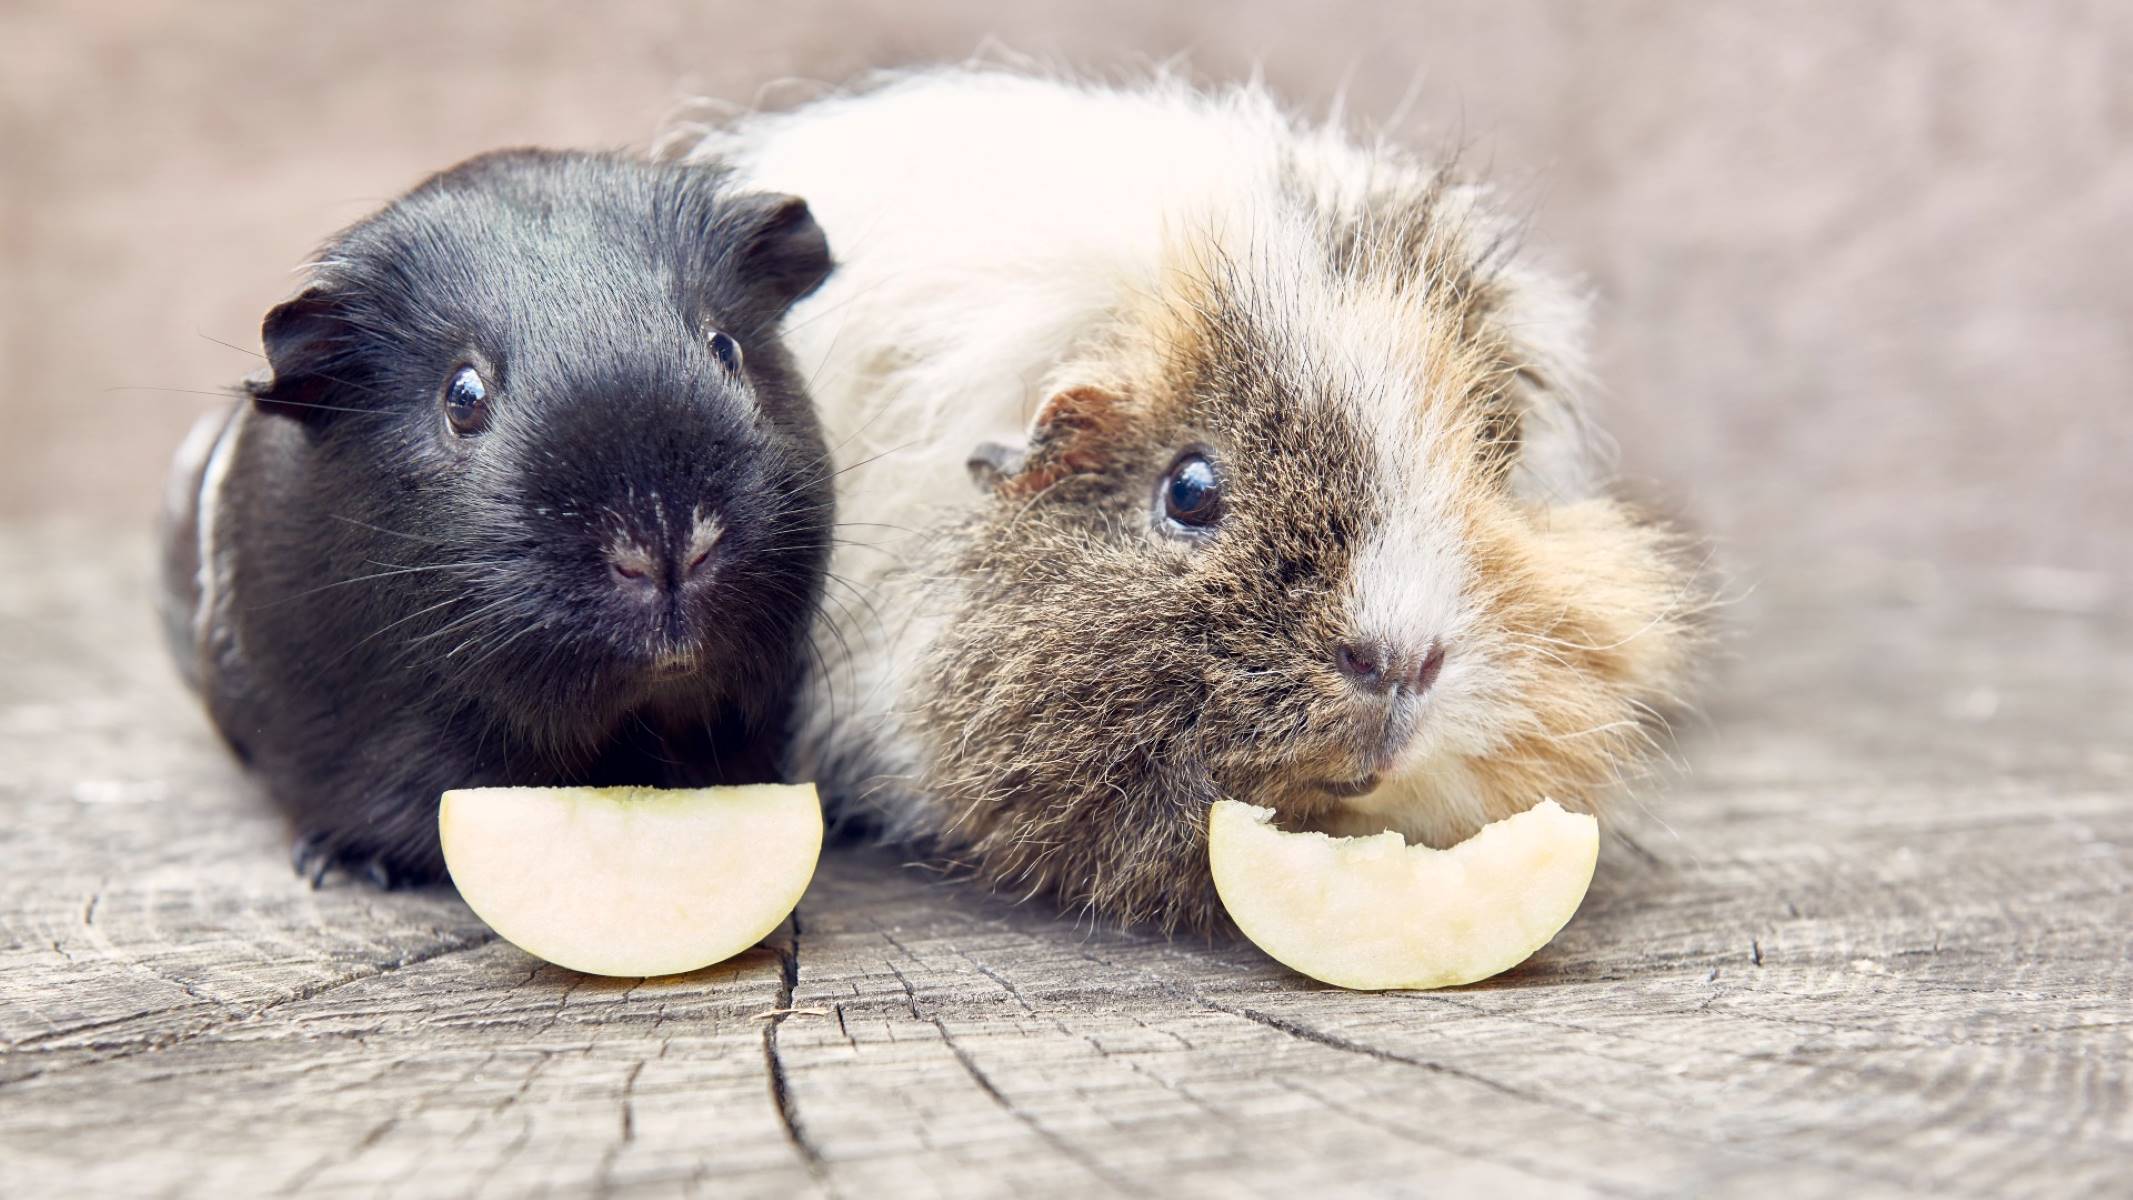 The Ultimate Guide To What Fruits Guinea Pigs Can Eat!